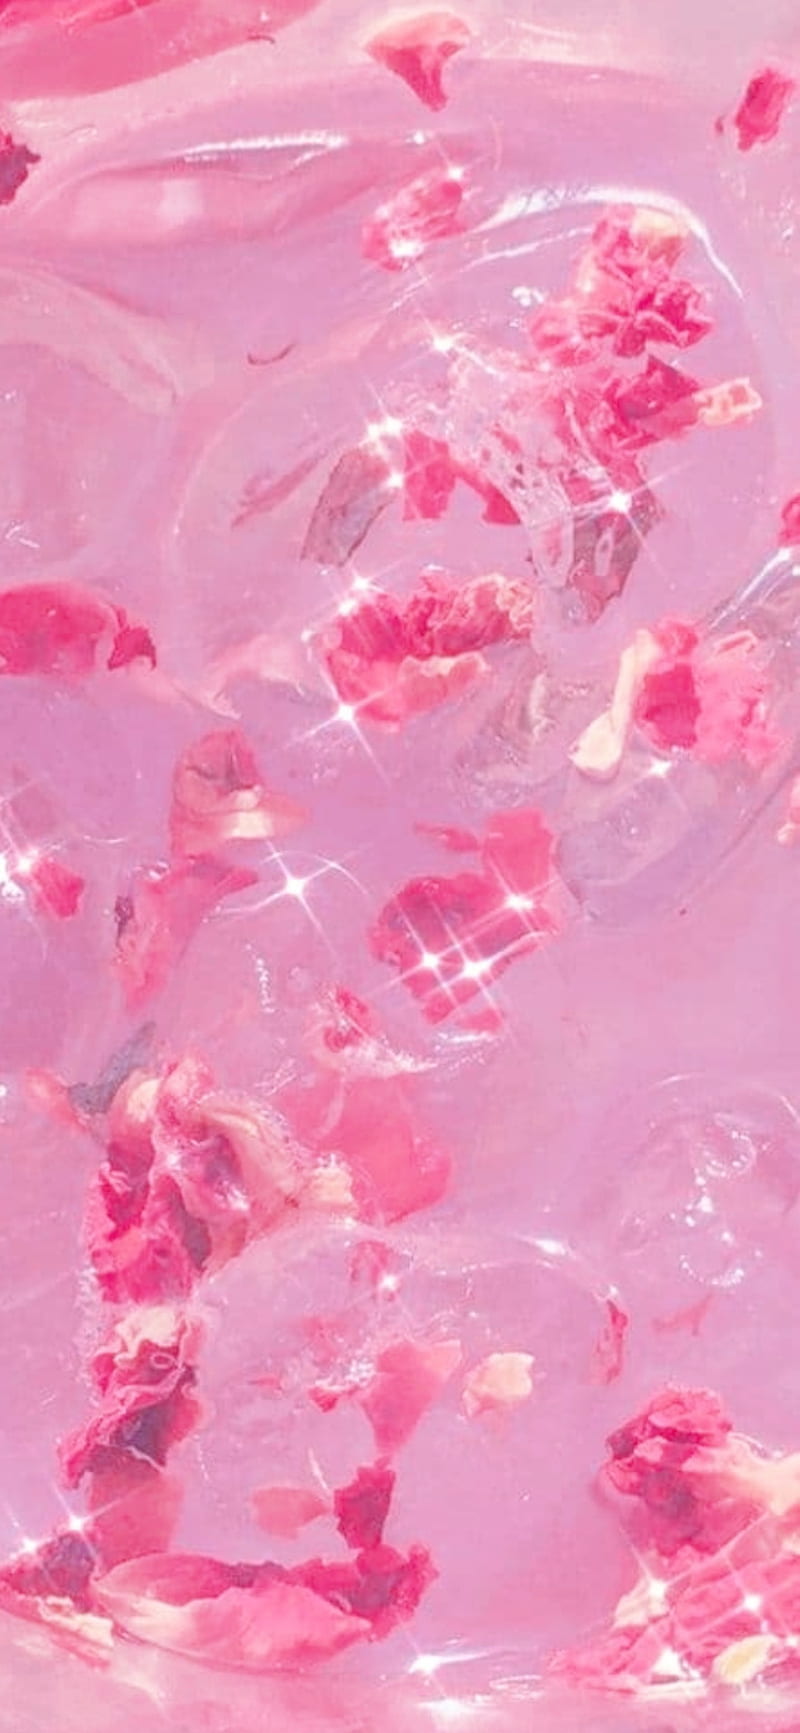 A close up of a pink marble background with flowers - Doja Cat